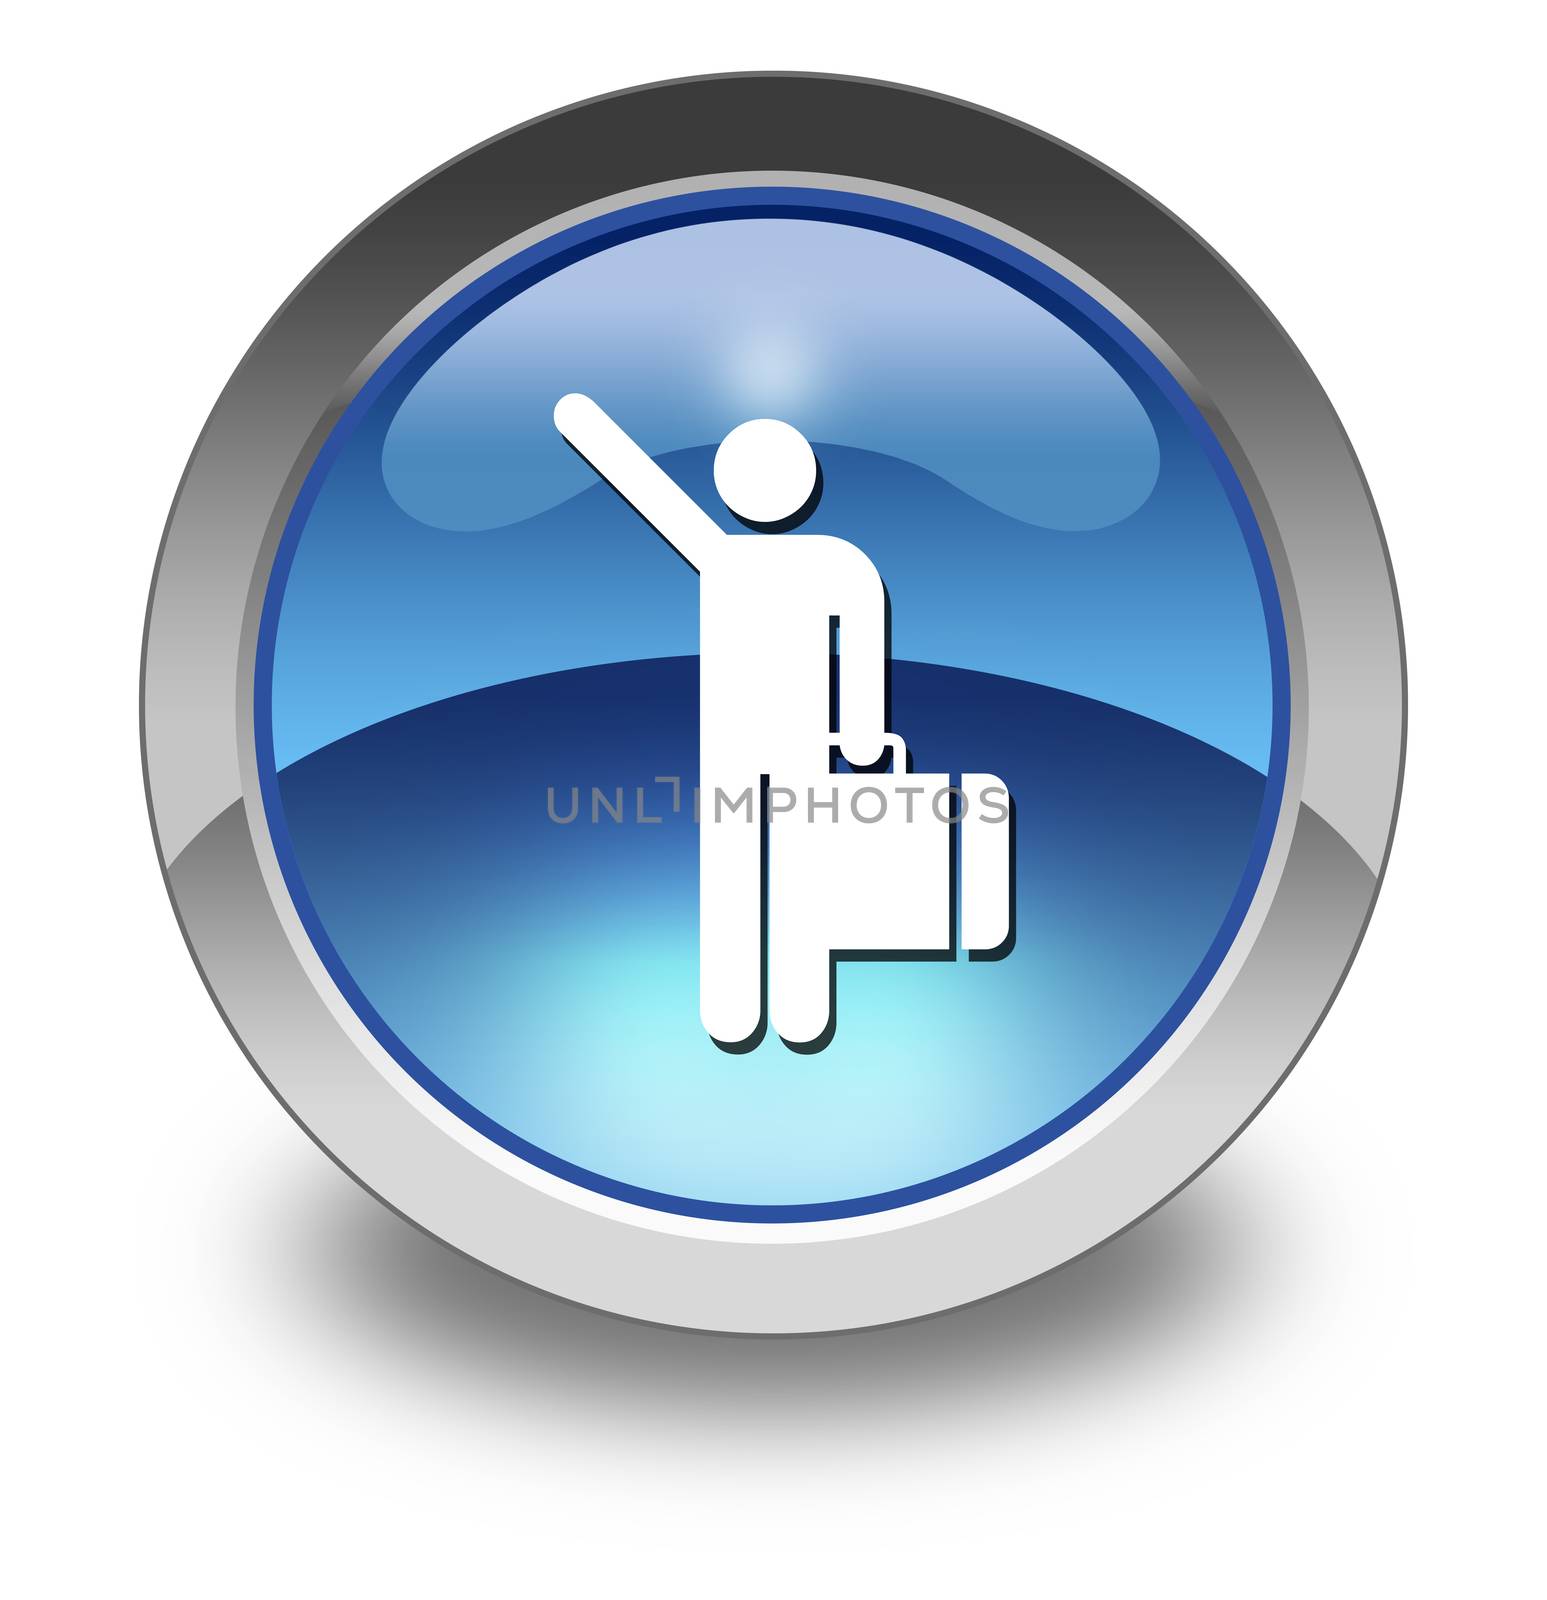 Icon, Button, Pictogram with Arriving Flights symbol